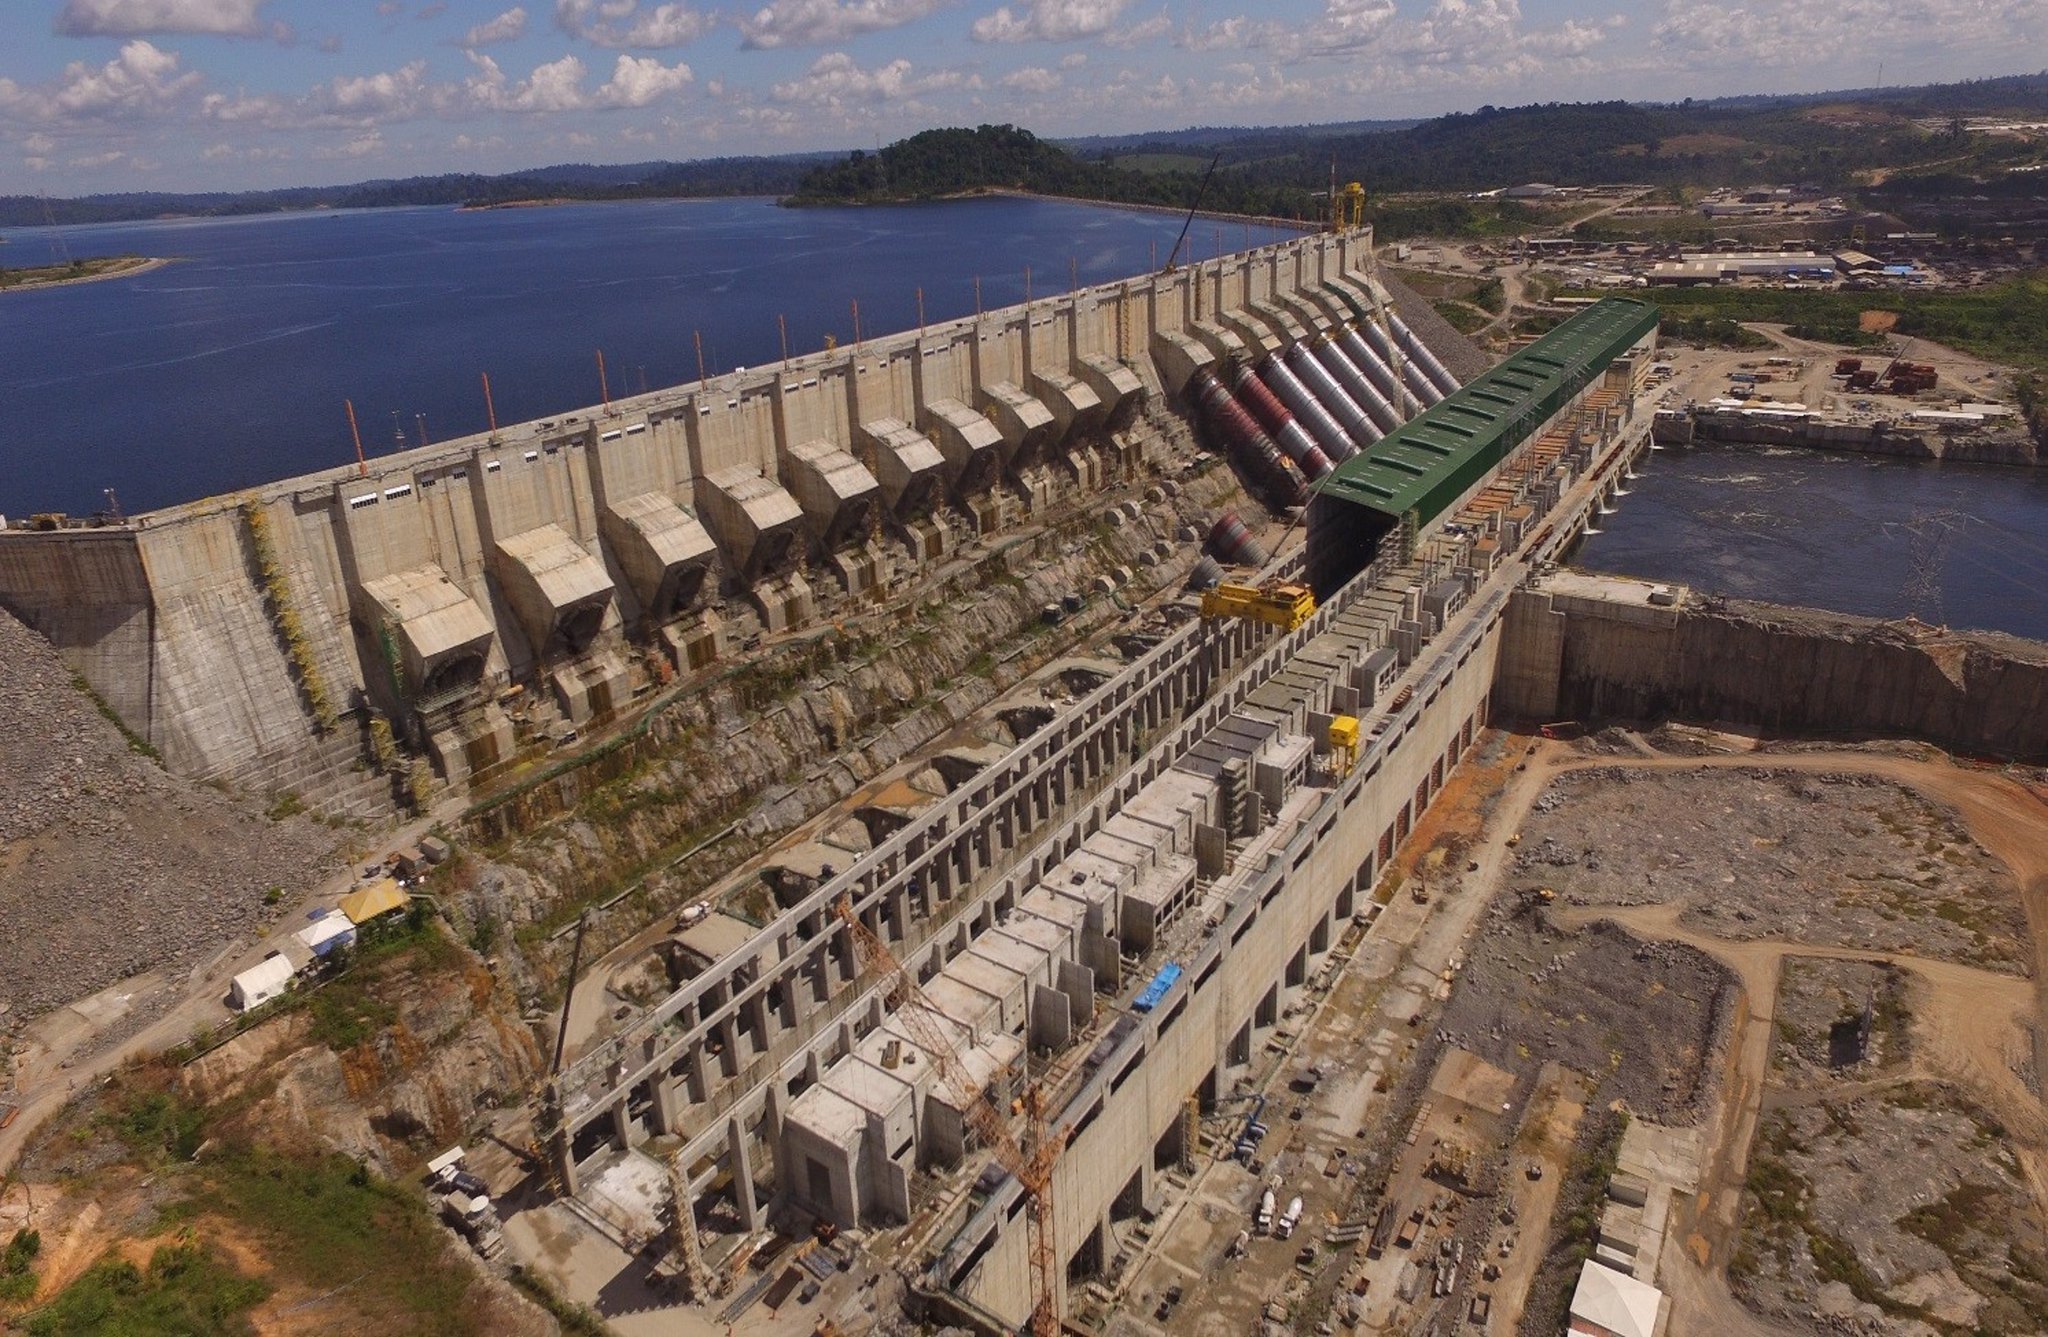 Brazil’s Belo Monte Dam: Greenwashing contested (commentary)